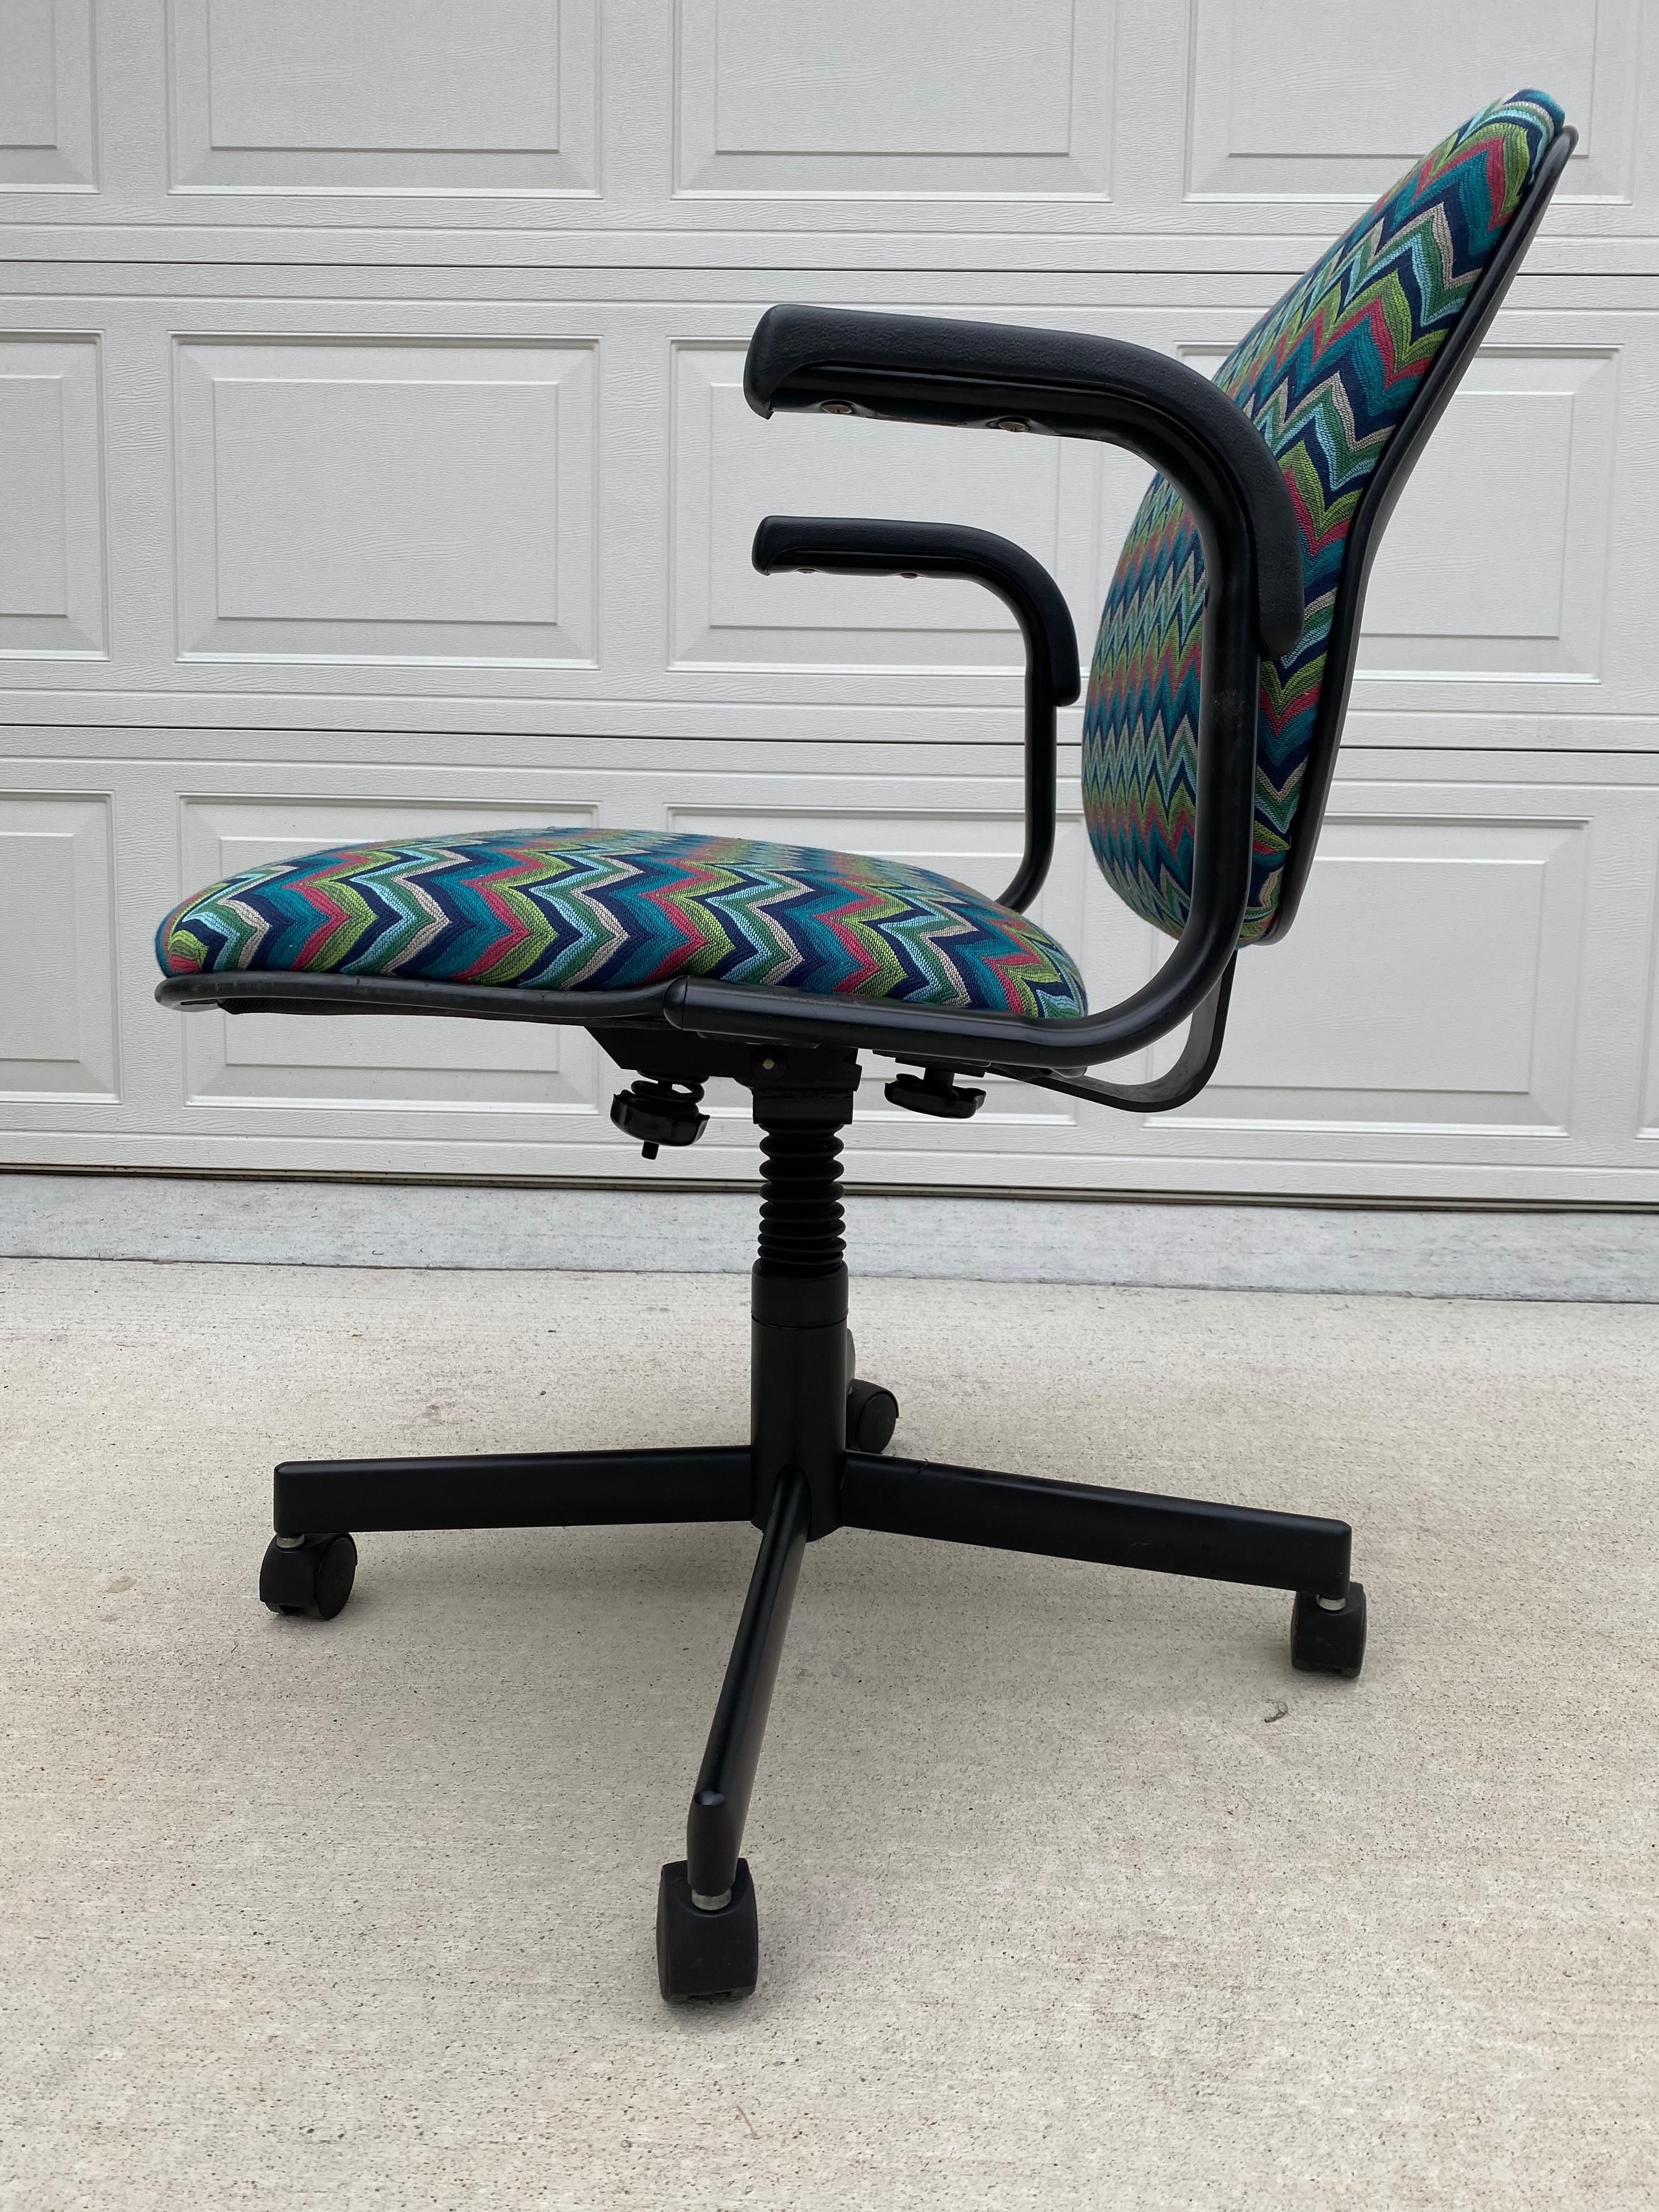 Late 20th Century 1980s Reupholstered Office Chair by Stylex, Inc. In Mid-Century Modern Fabric For Sale